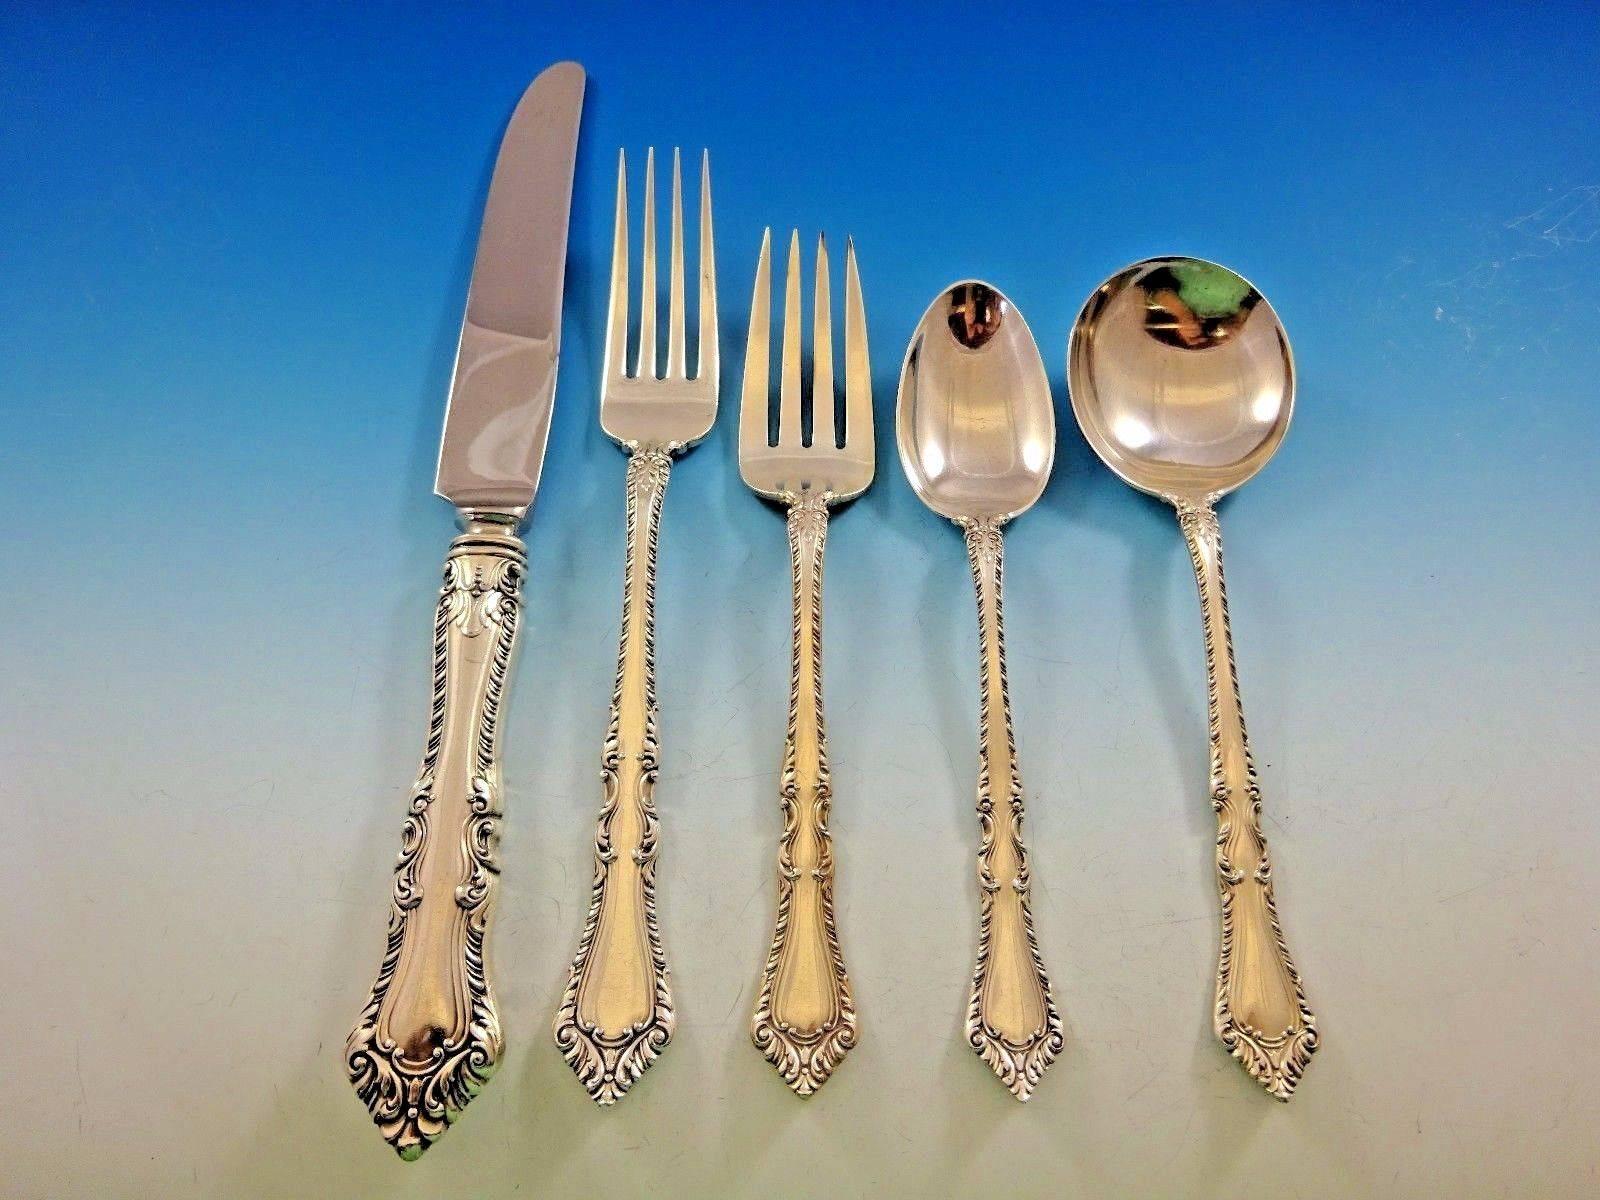 Foxhall by Watson sterling silver flatware set of 40 pieces. This set includes: 

Eight knives, 9